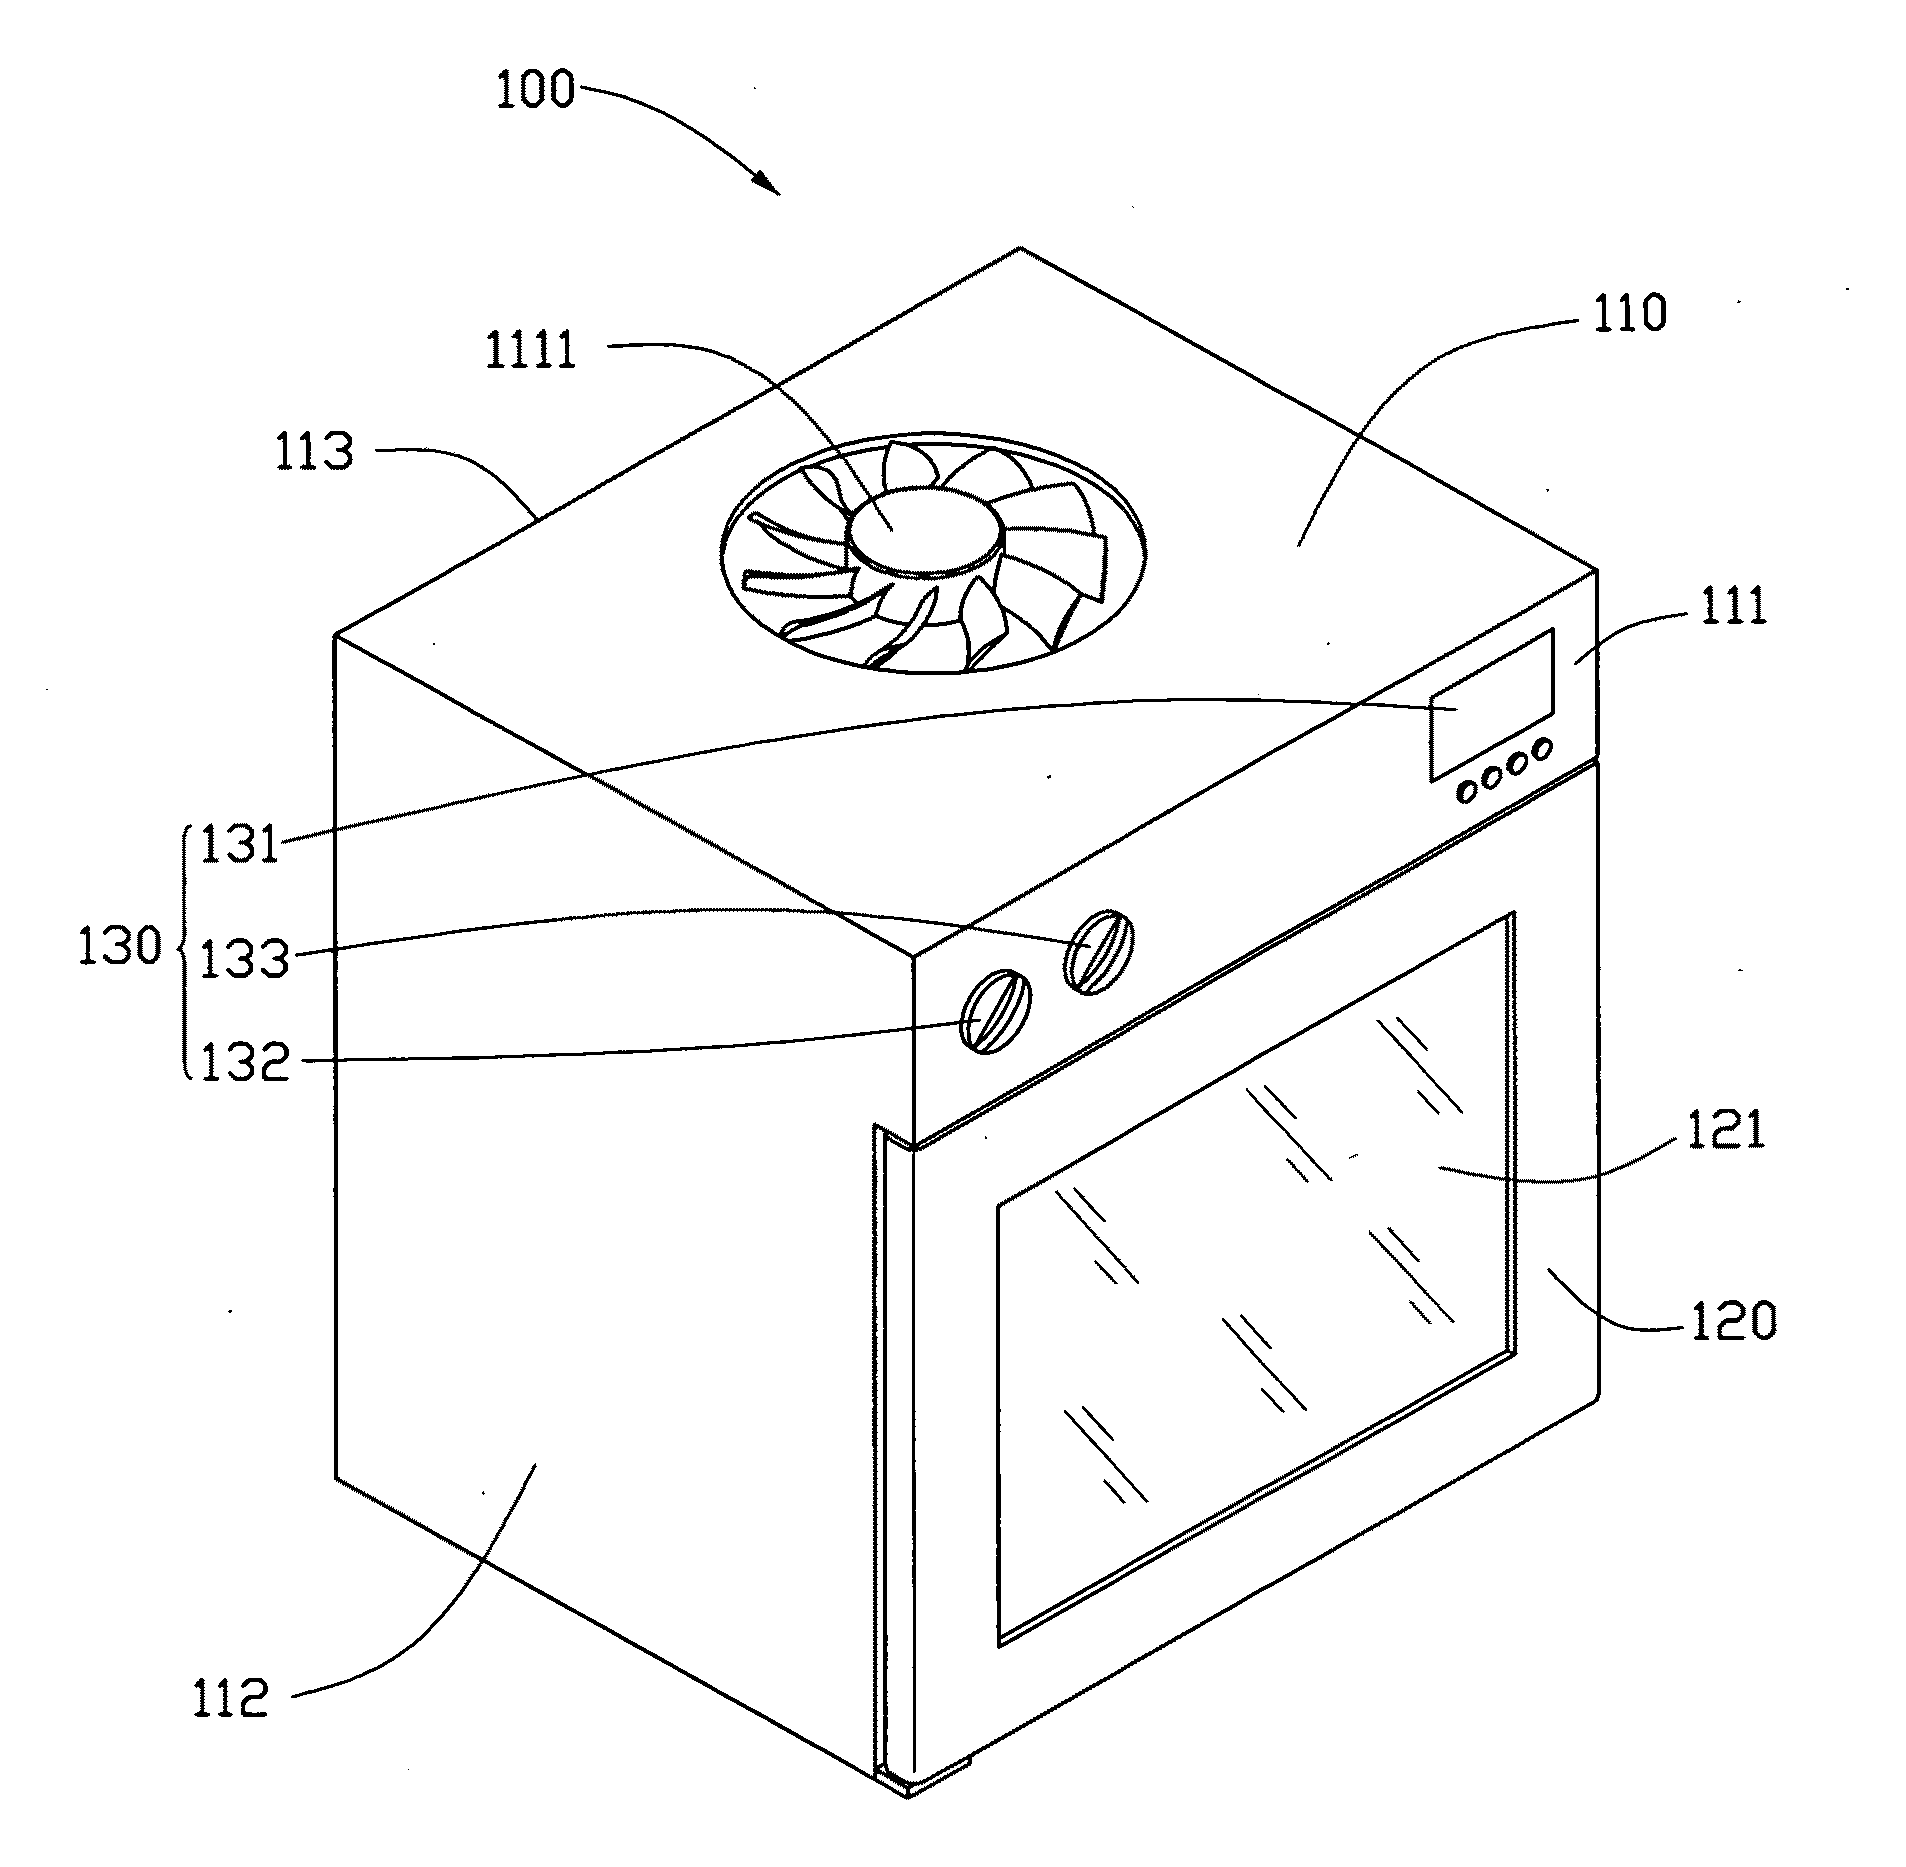 Carbon nanotube heater-equipped electric oven